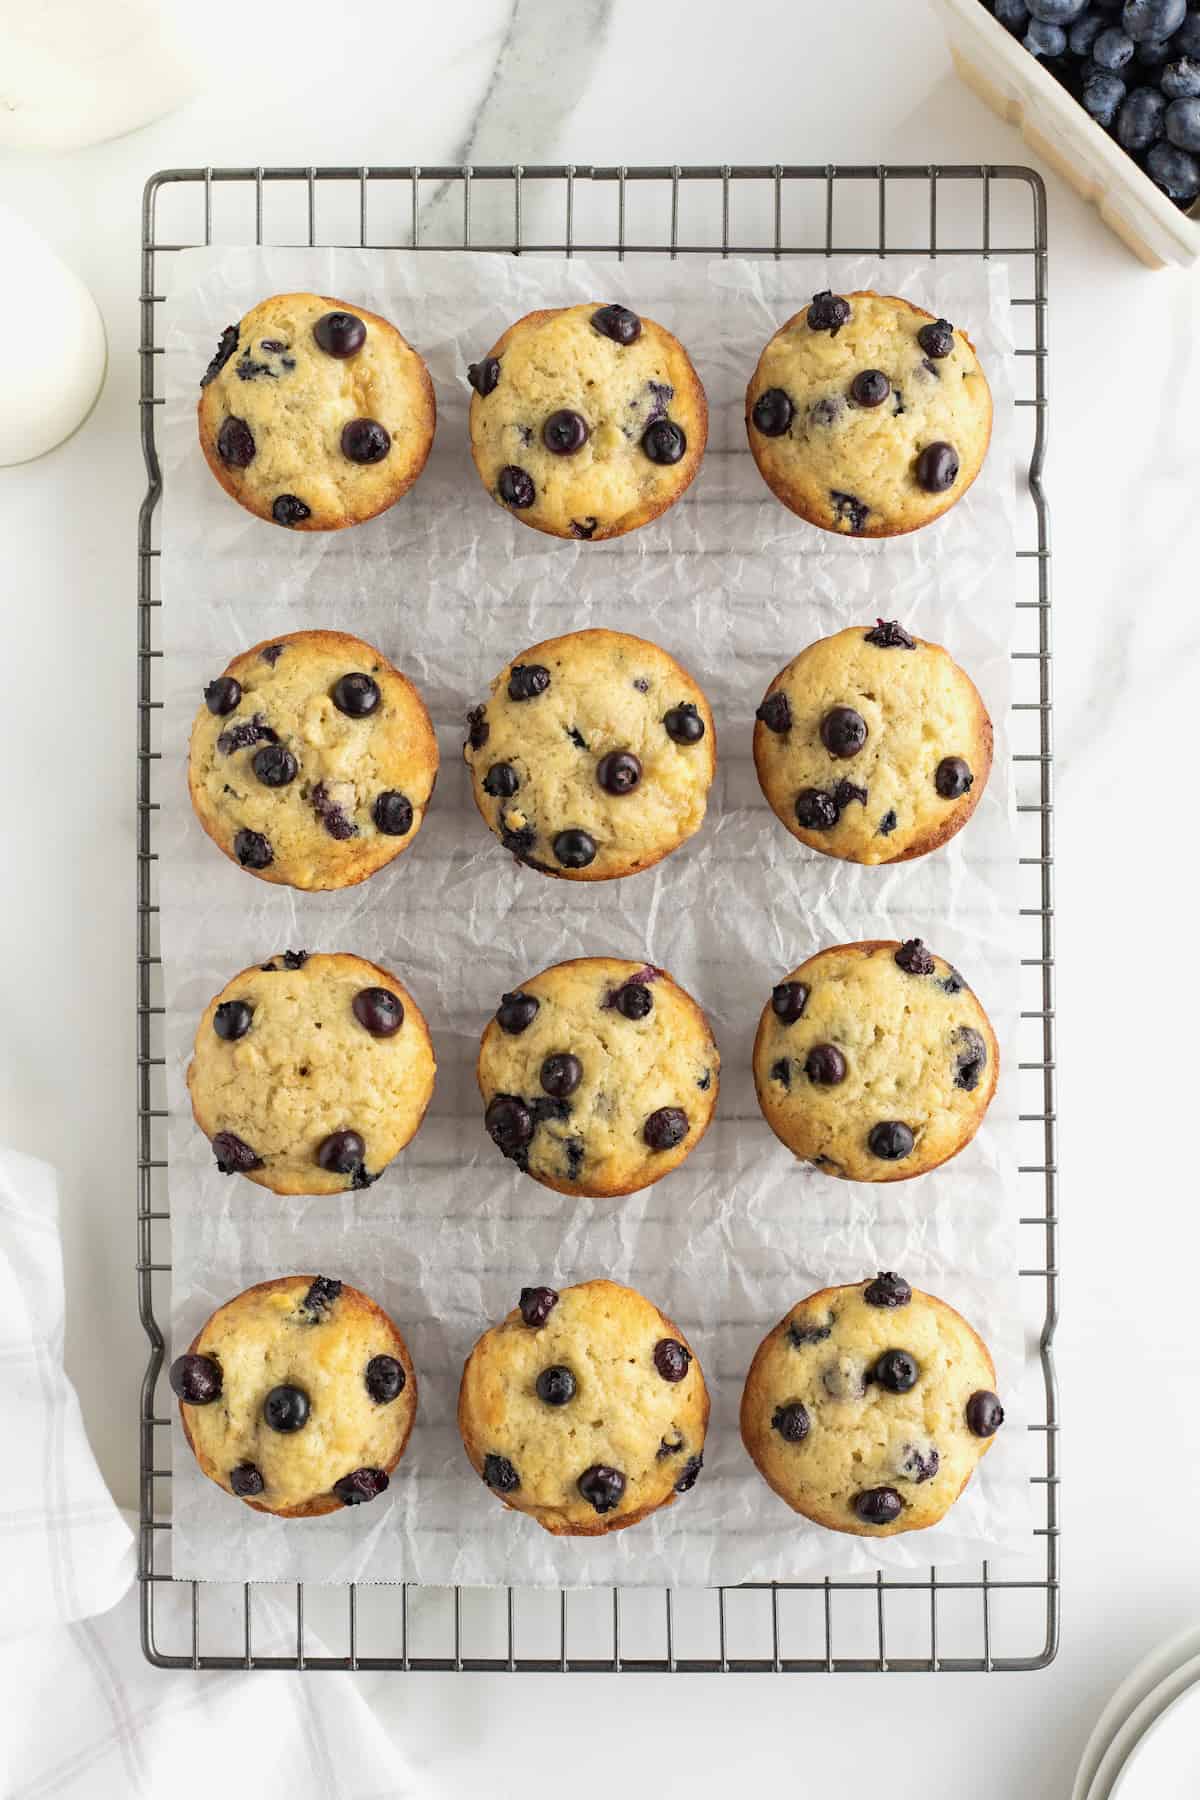 Banana Blueberry Muffins by The BakerMama